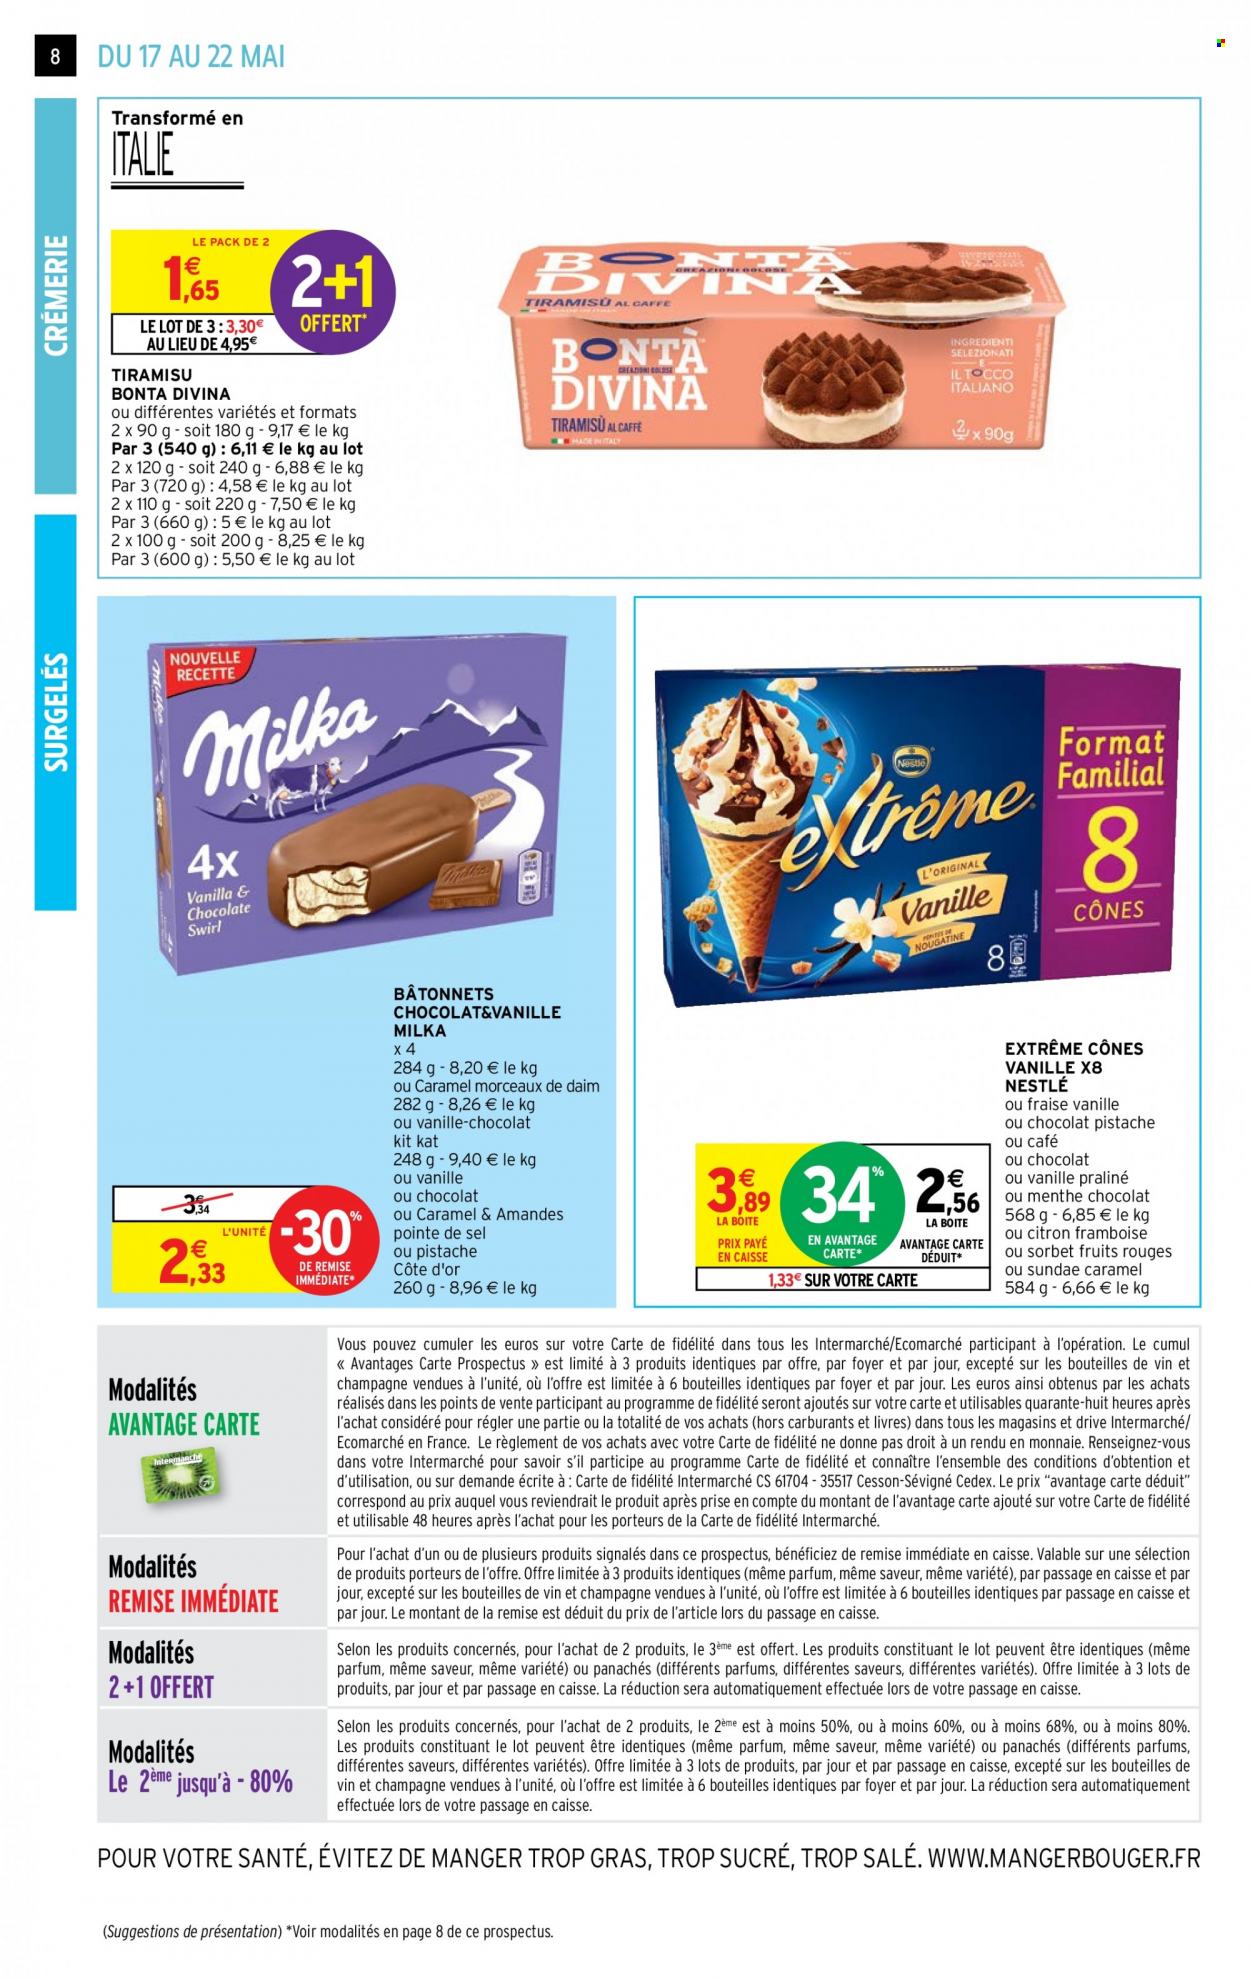 Catalogue Intermarché Express - 17.05.2022 - 22.05.2022. Page 8.